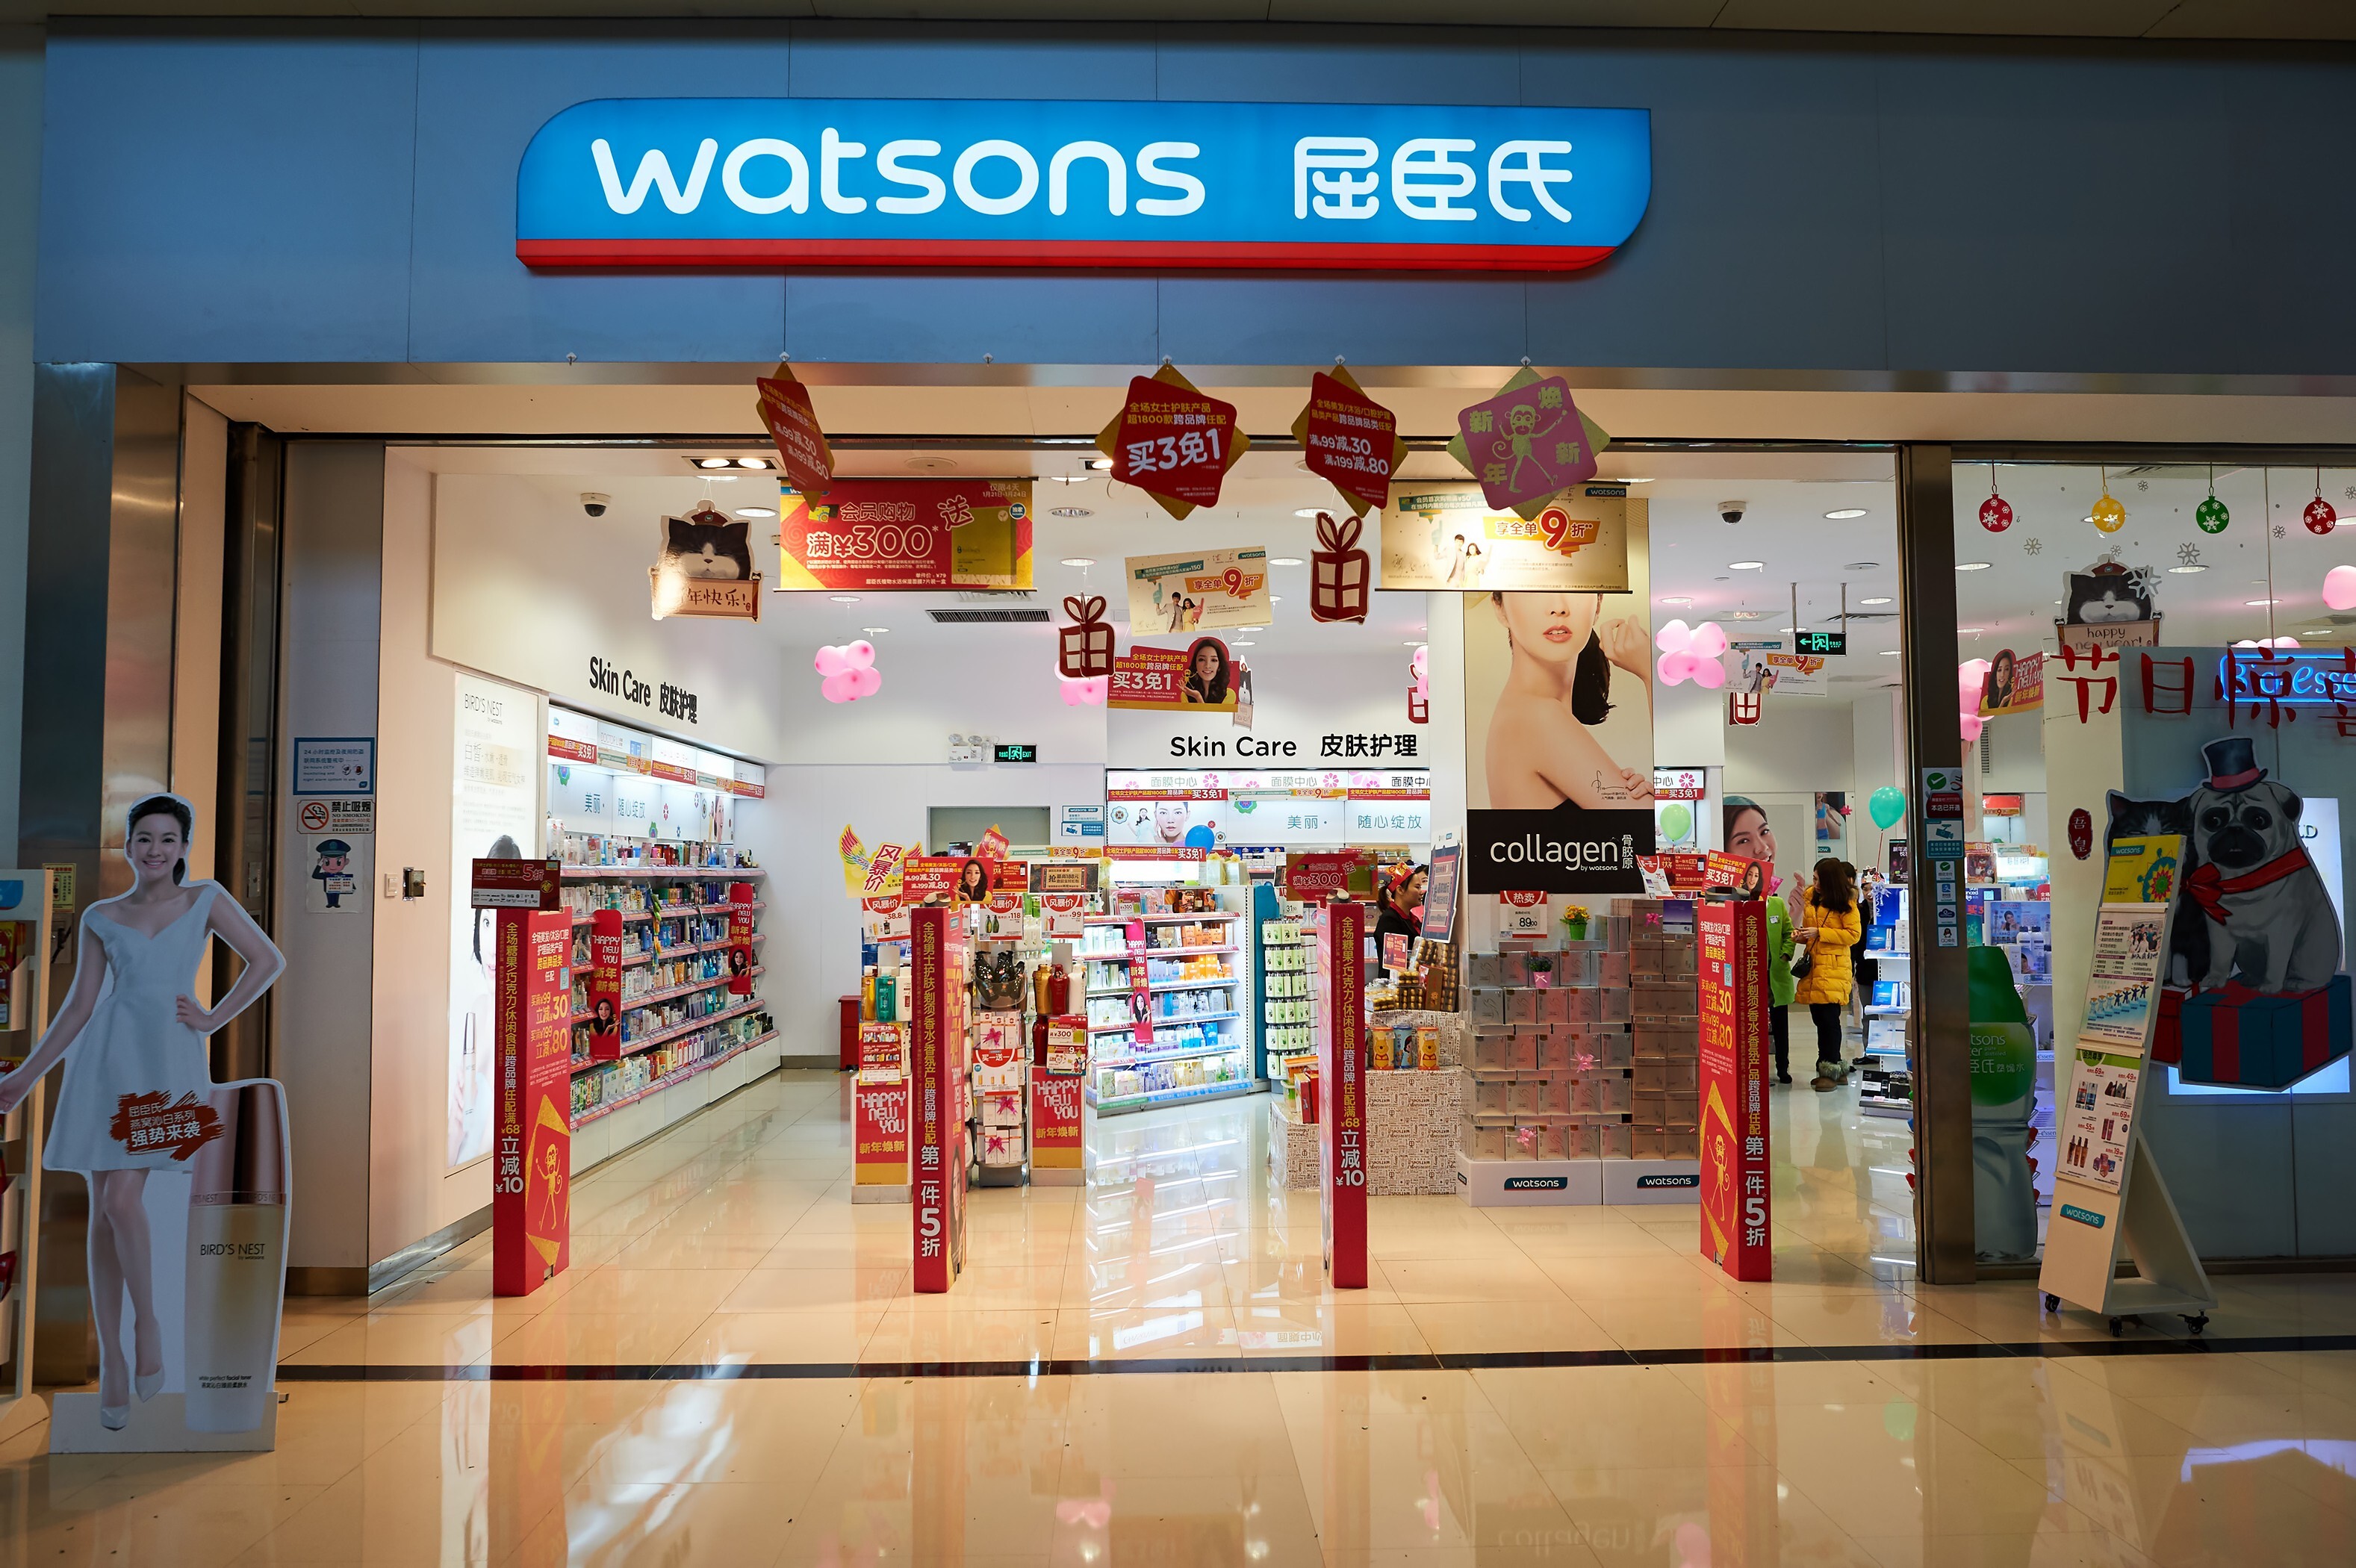 A branch of Watsons at the Shenzhen Vanke Plaza shopping mall in the Longgang district of Shenzhen, a major bay area city. Photo: Shutterstock